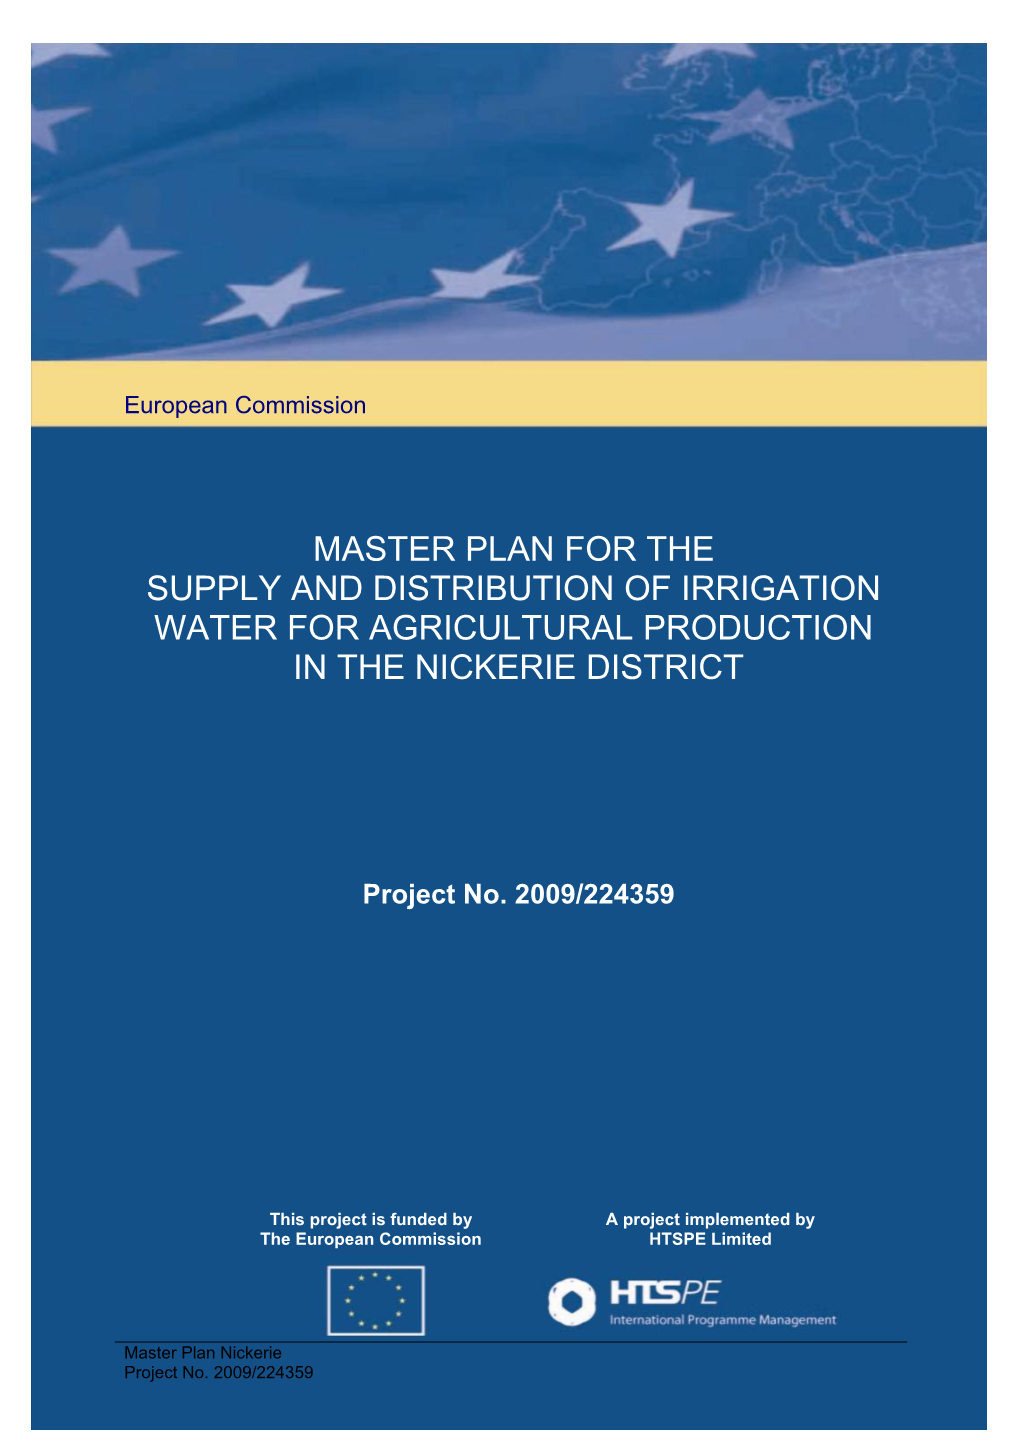 Master Plan for the Supply and Distribution of Irrigation Water for Agricultural Production in the Nickerie District